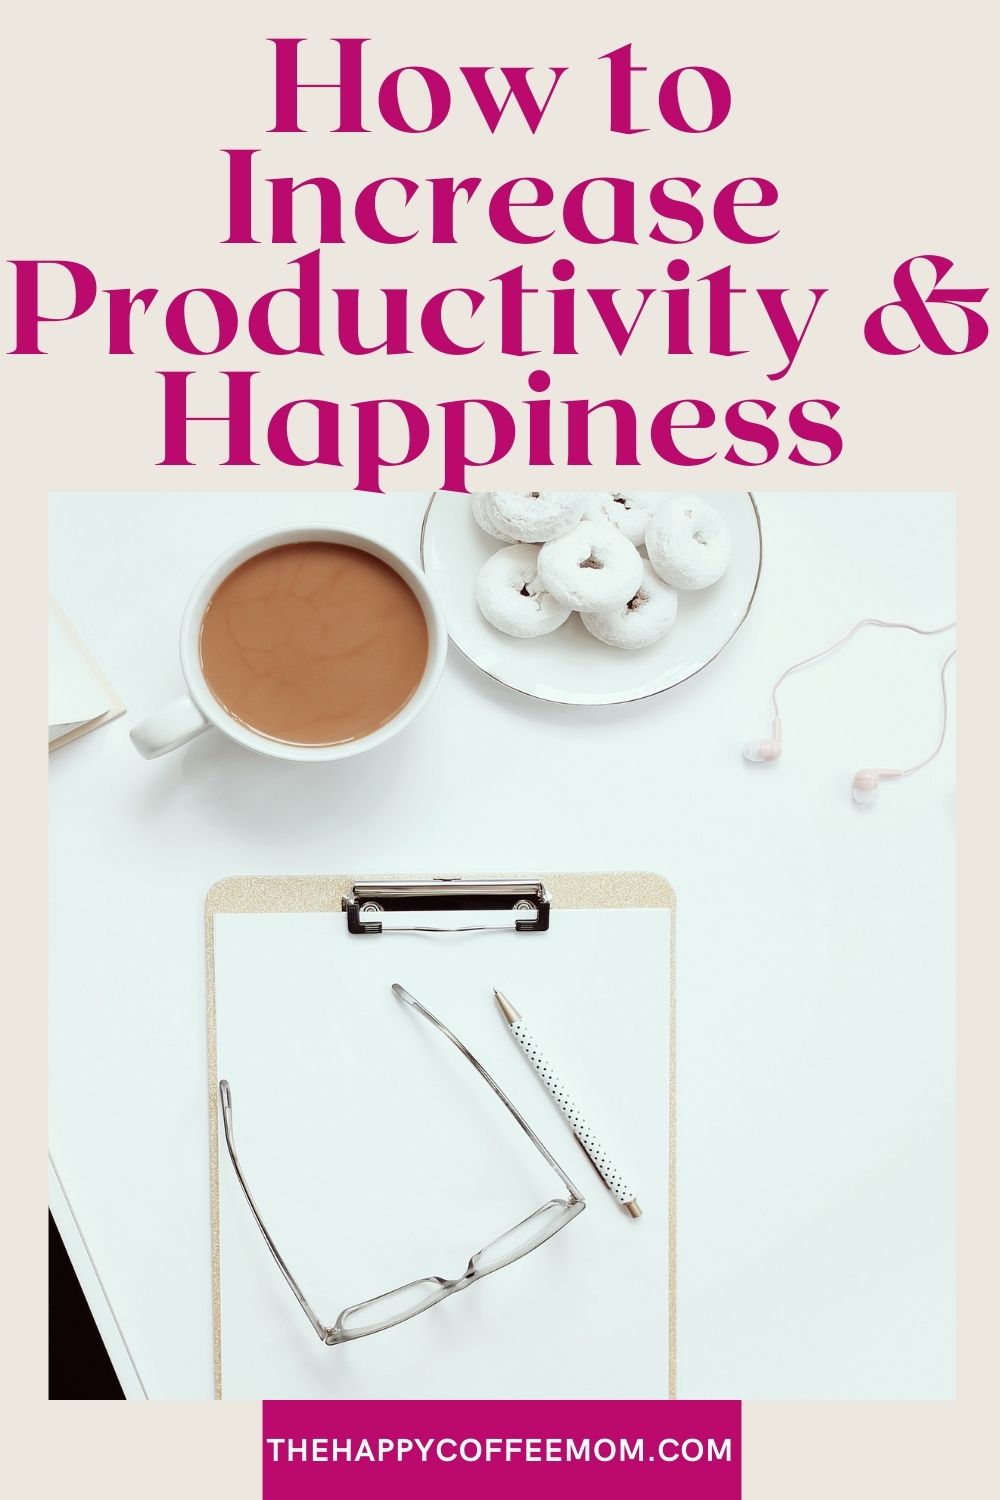 How to Increase Productivity and Happiness